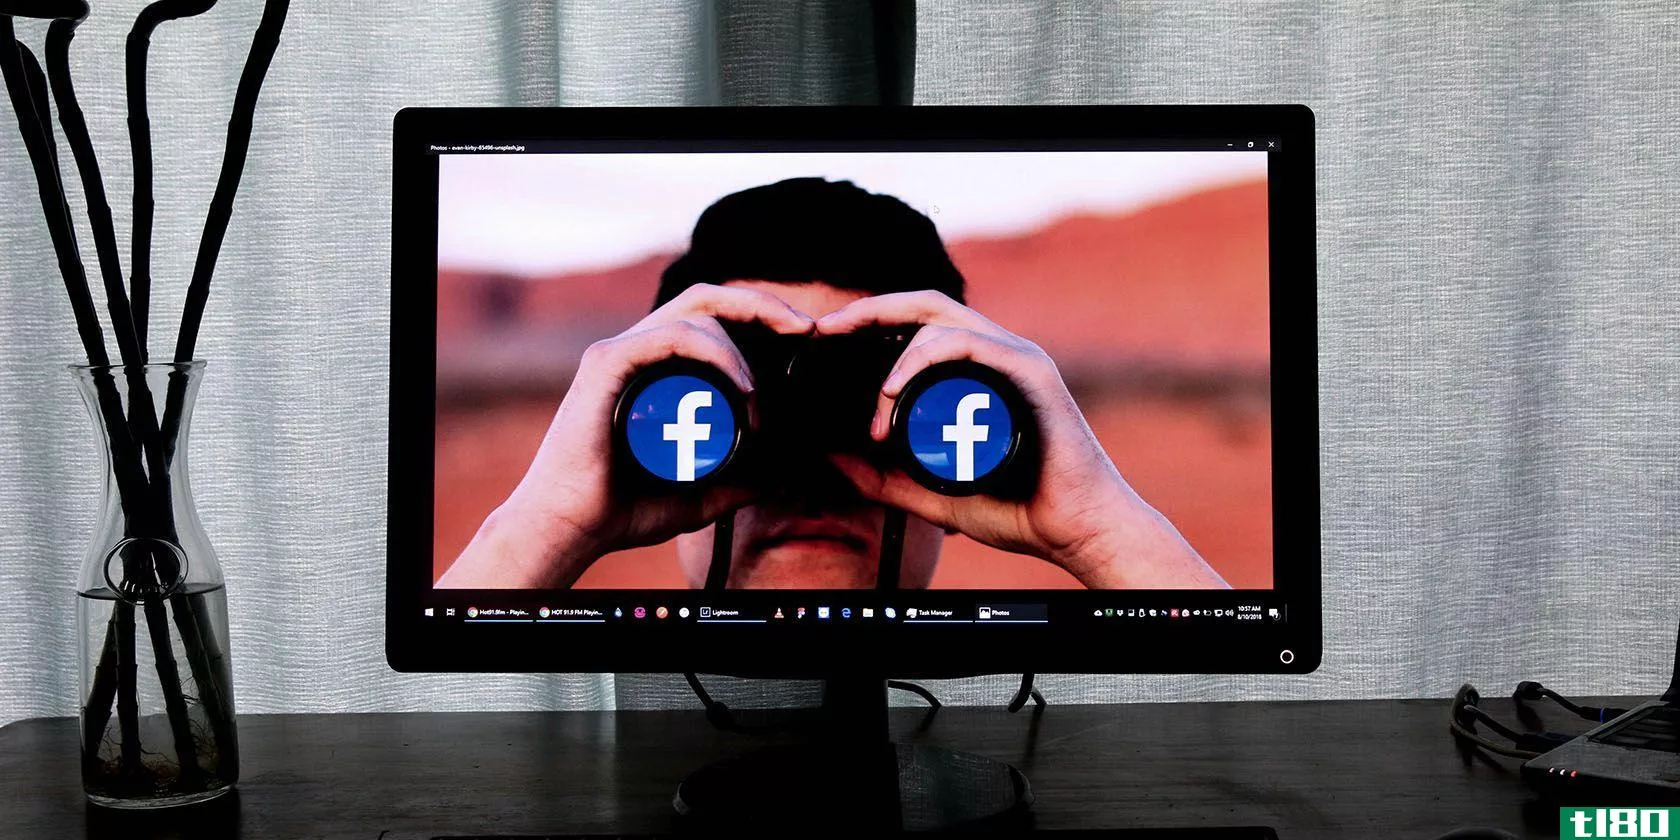 Facebook spying on you